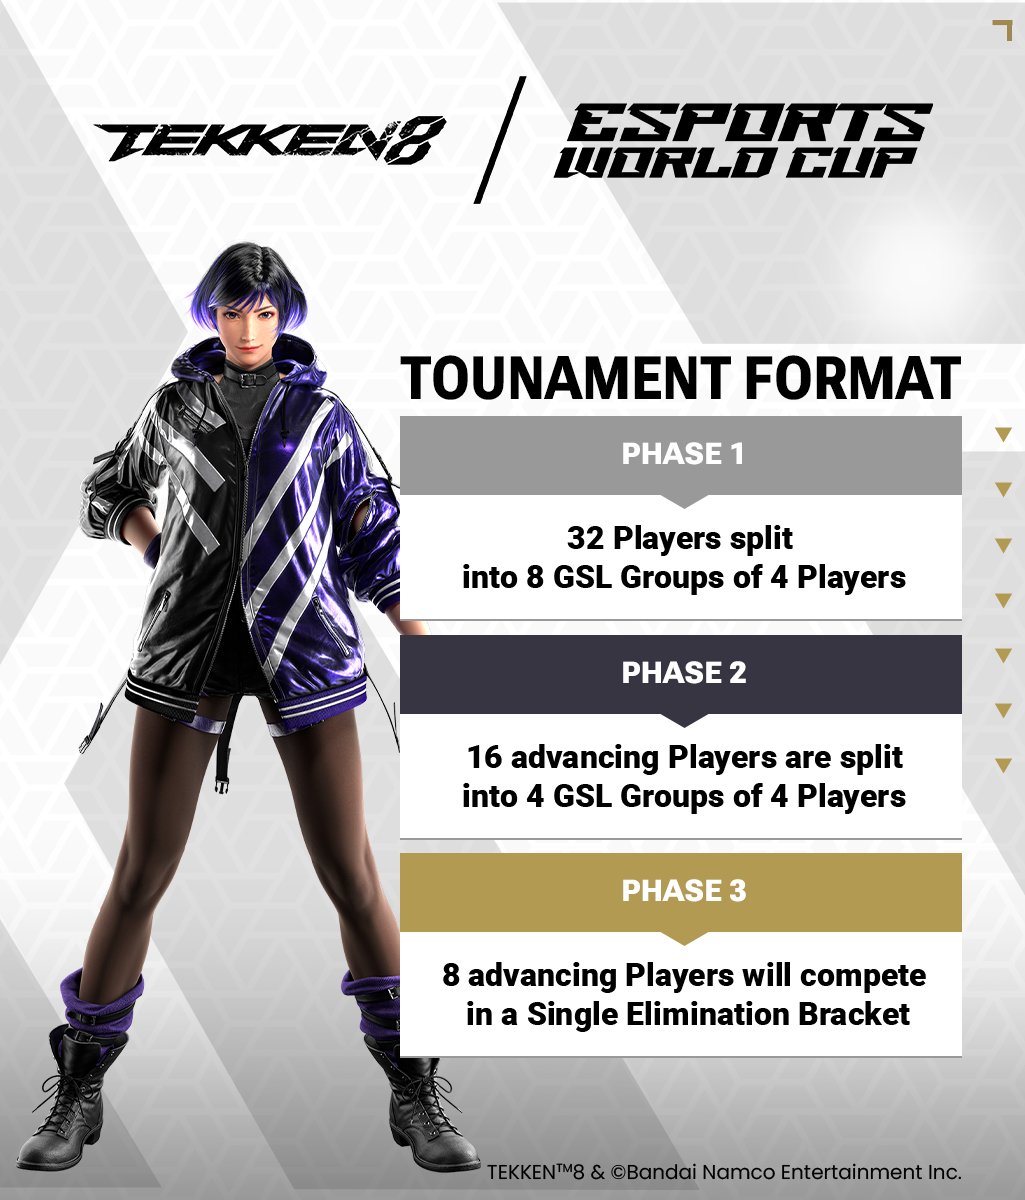 Check out the tournament format of our @TEKKEN 8 showdown at #EsportsWorldCup 2024! 32 individual players will duke it out for their share of $1,000,000! Full rulebook available here 👇👇 esl.gg/ewc-rulebook-t…